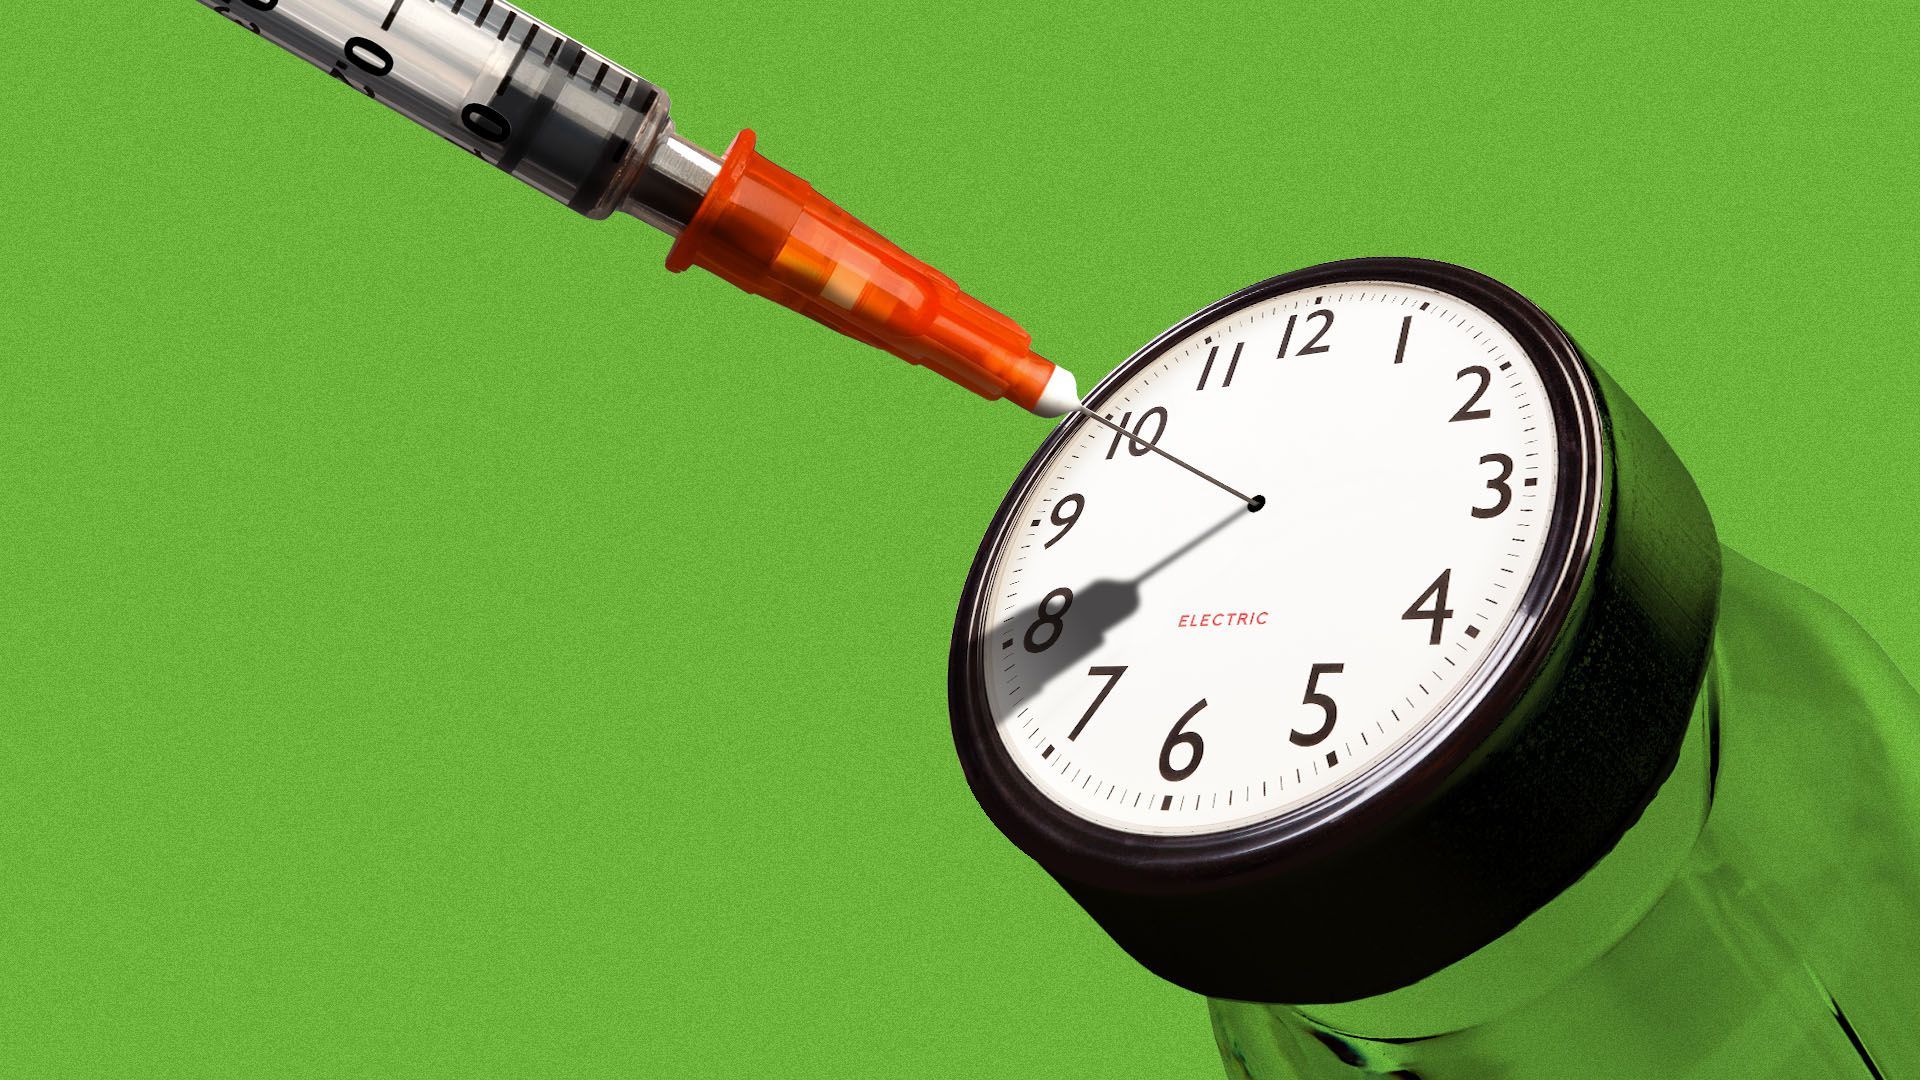 Illustration of a syringe in a bottle of insulin with a clock face cap